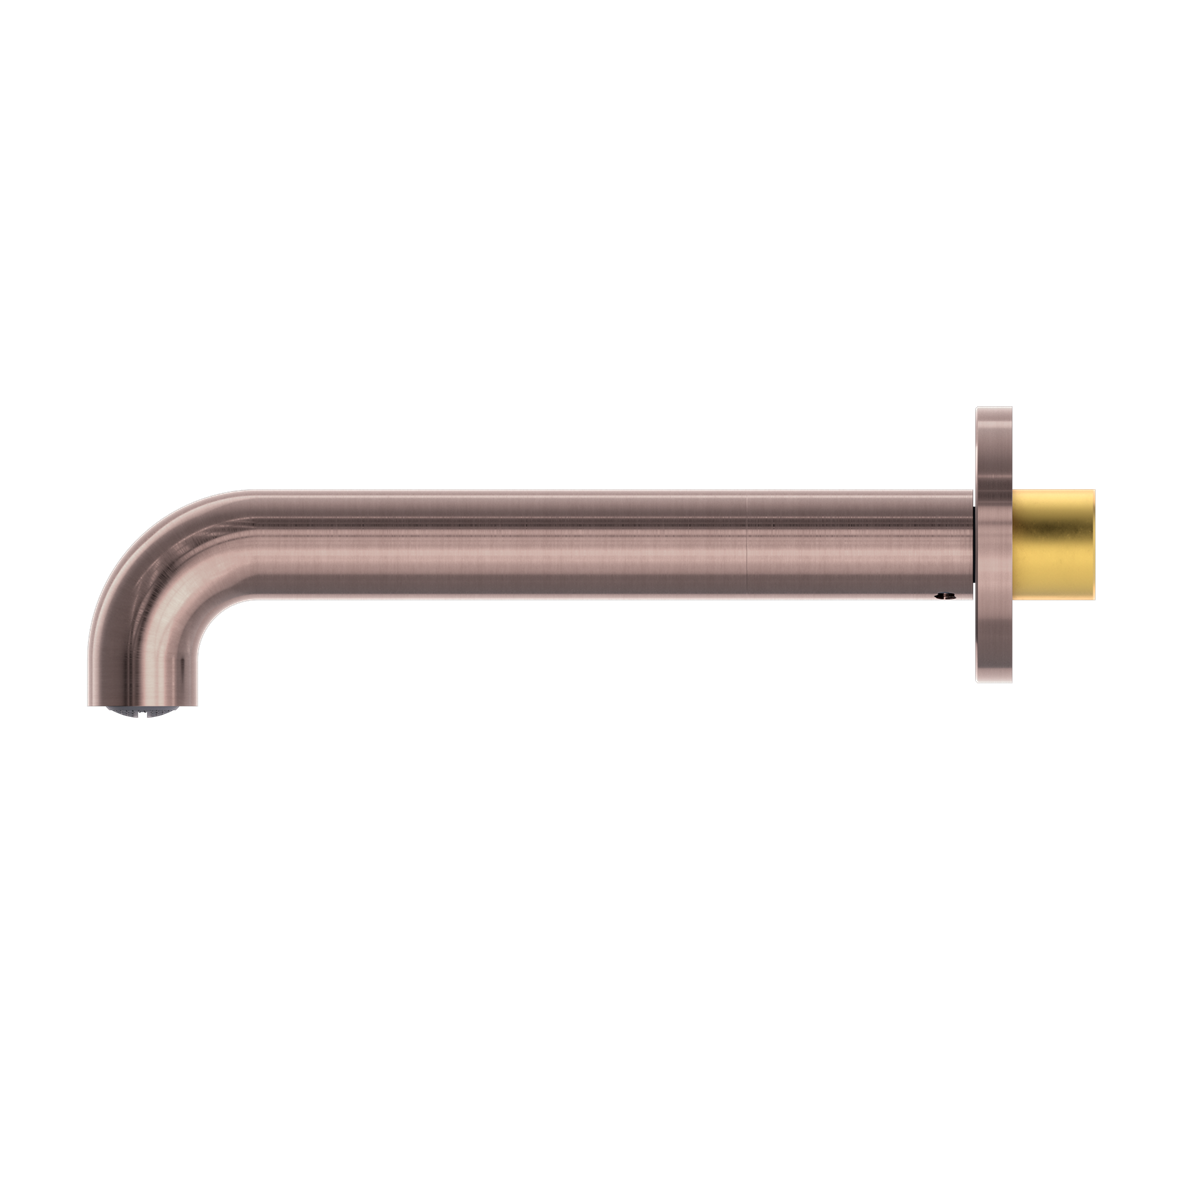 NERO MECCA BASIN/ BATH SPOUT BRUSHED BRONZE (AVAILABLE IN 120MM,160MM,185MM, 230MM AND 260MM)